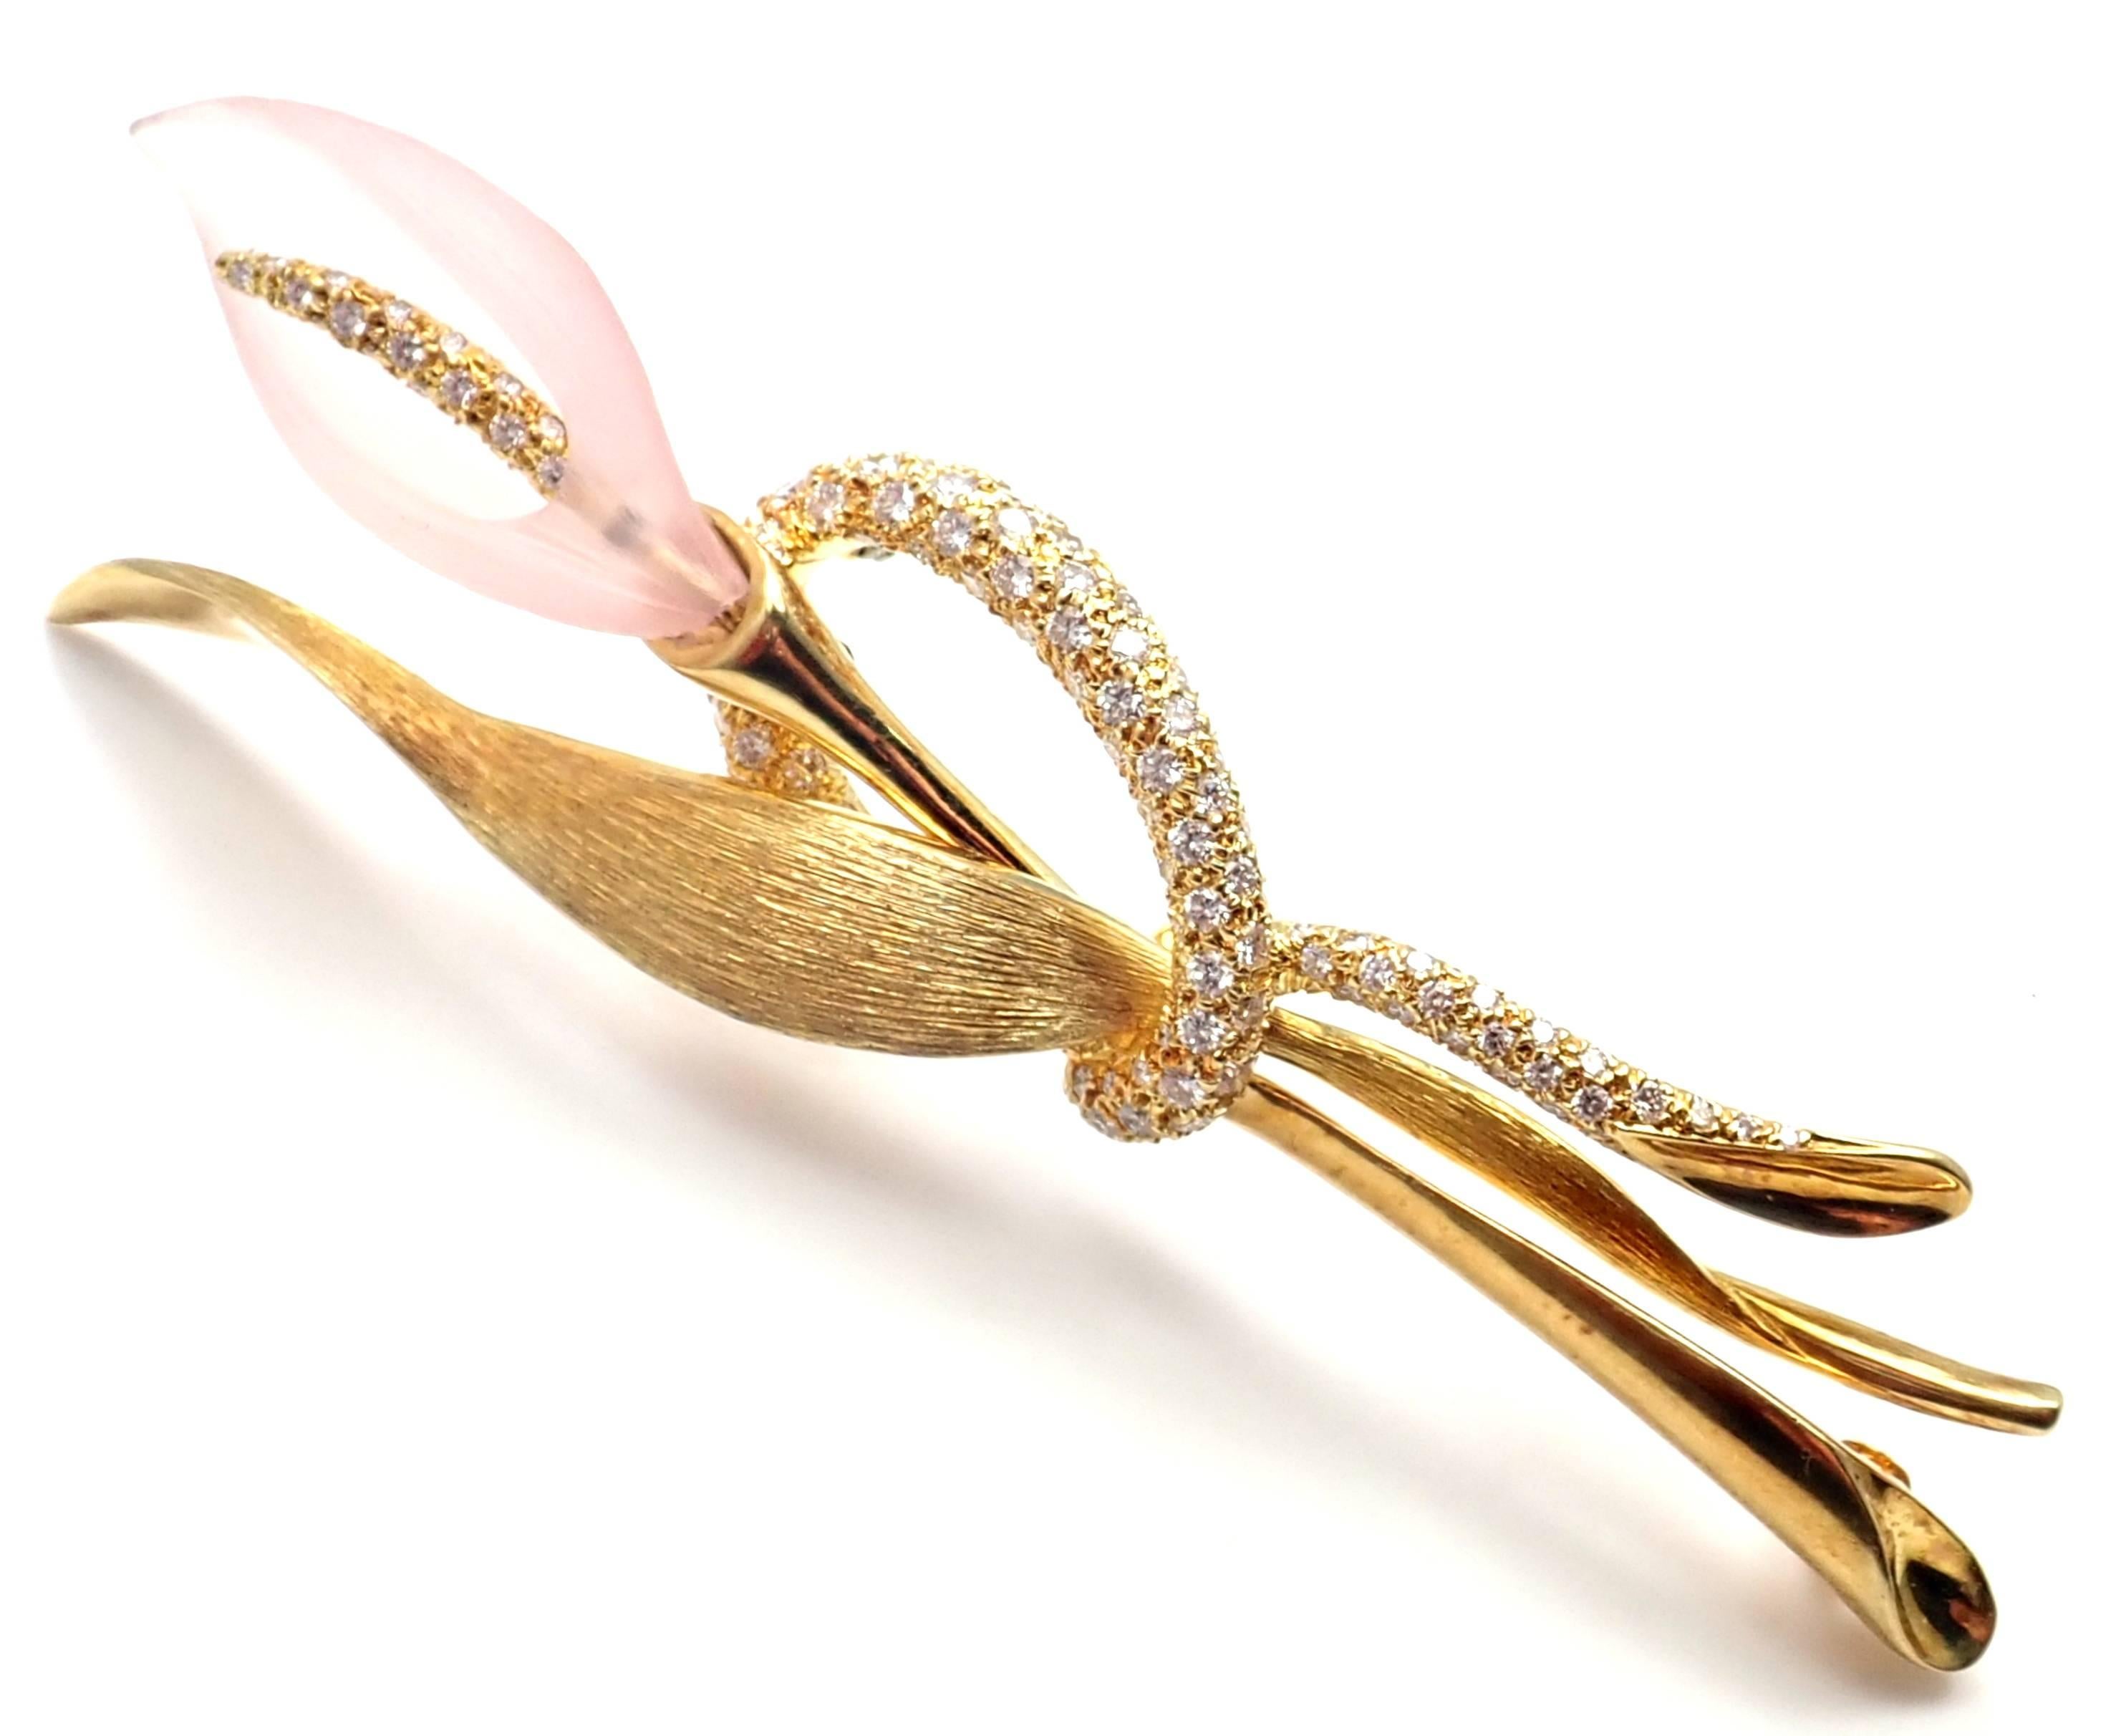 18k Yellow Gold Diamond Rose Quartz Calla Lily Flower Pin Brooch By Henry Dunay. 
With 121 round brilliant cut diamonds VVS1 clarity G color total weight approx. 2.21ct
1 rose quartz
Details:
Measurements: 3.25